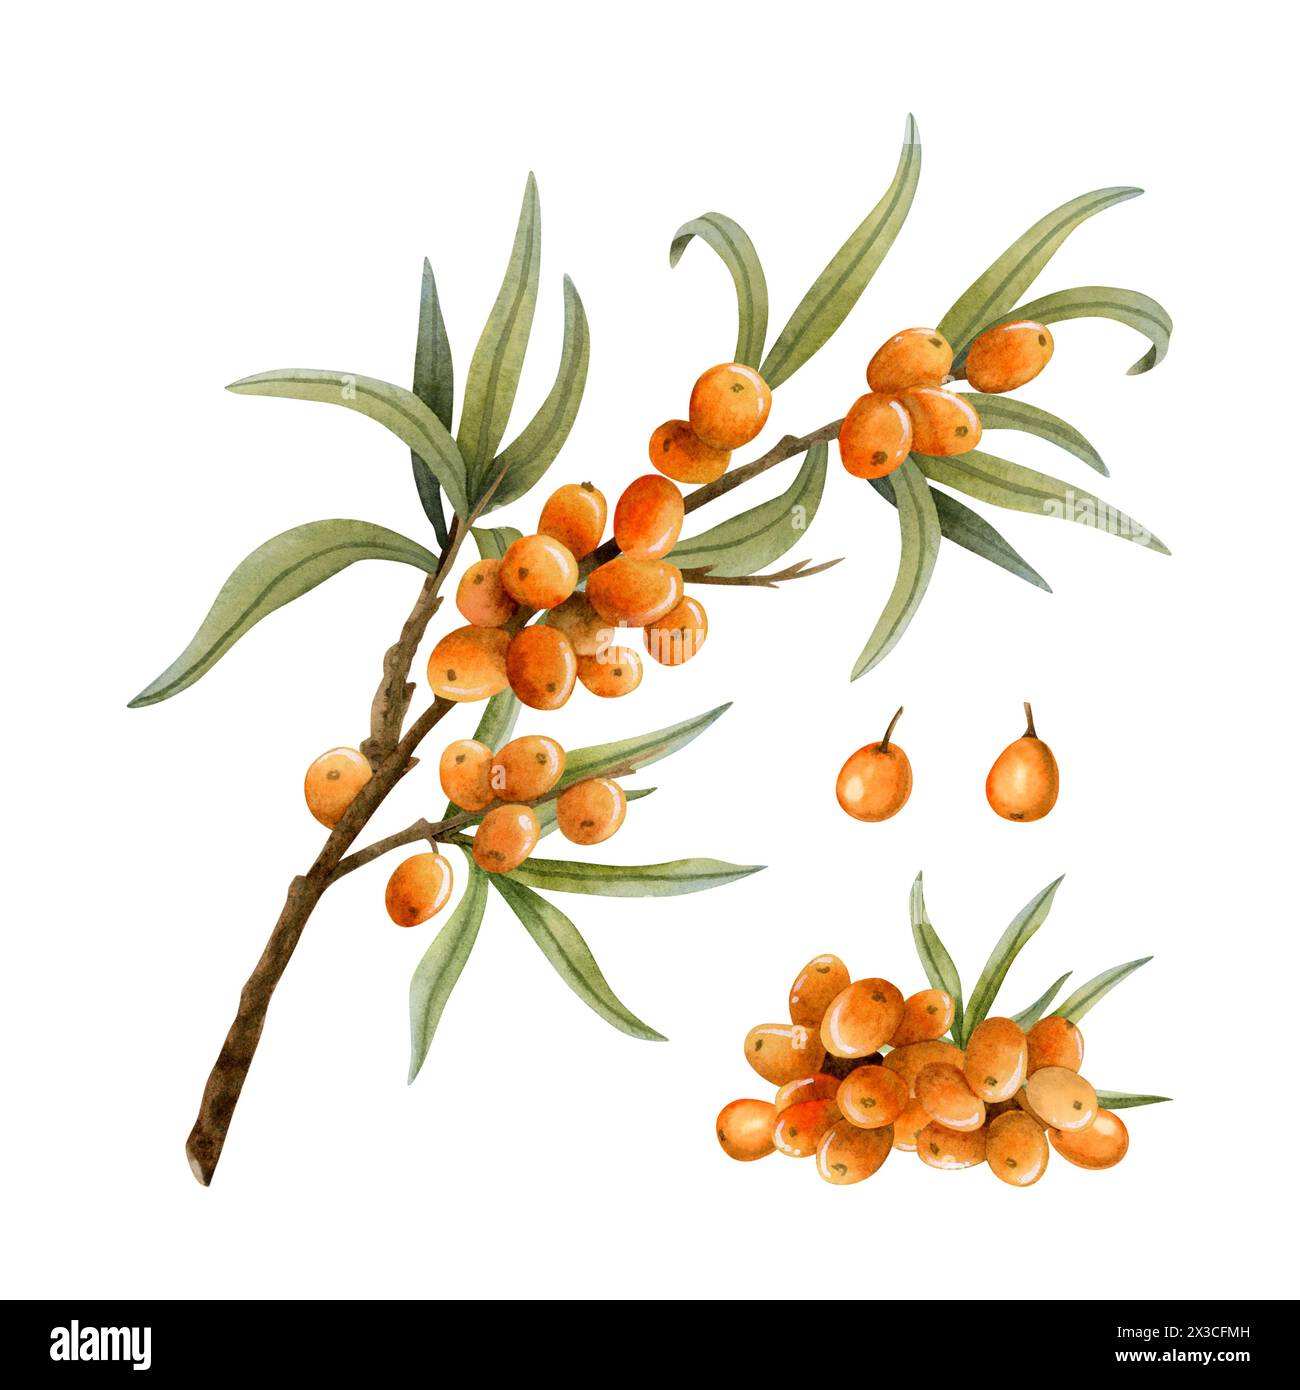 Wild sea buckthorn plant with orange berries and branch watercolor illustration set. Forest bush for herbal products Stock Photo